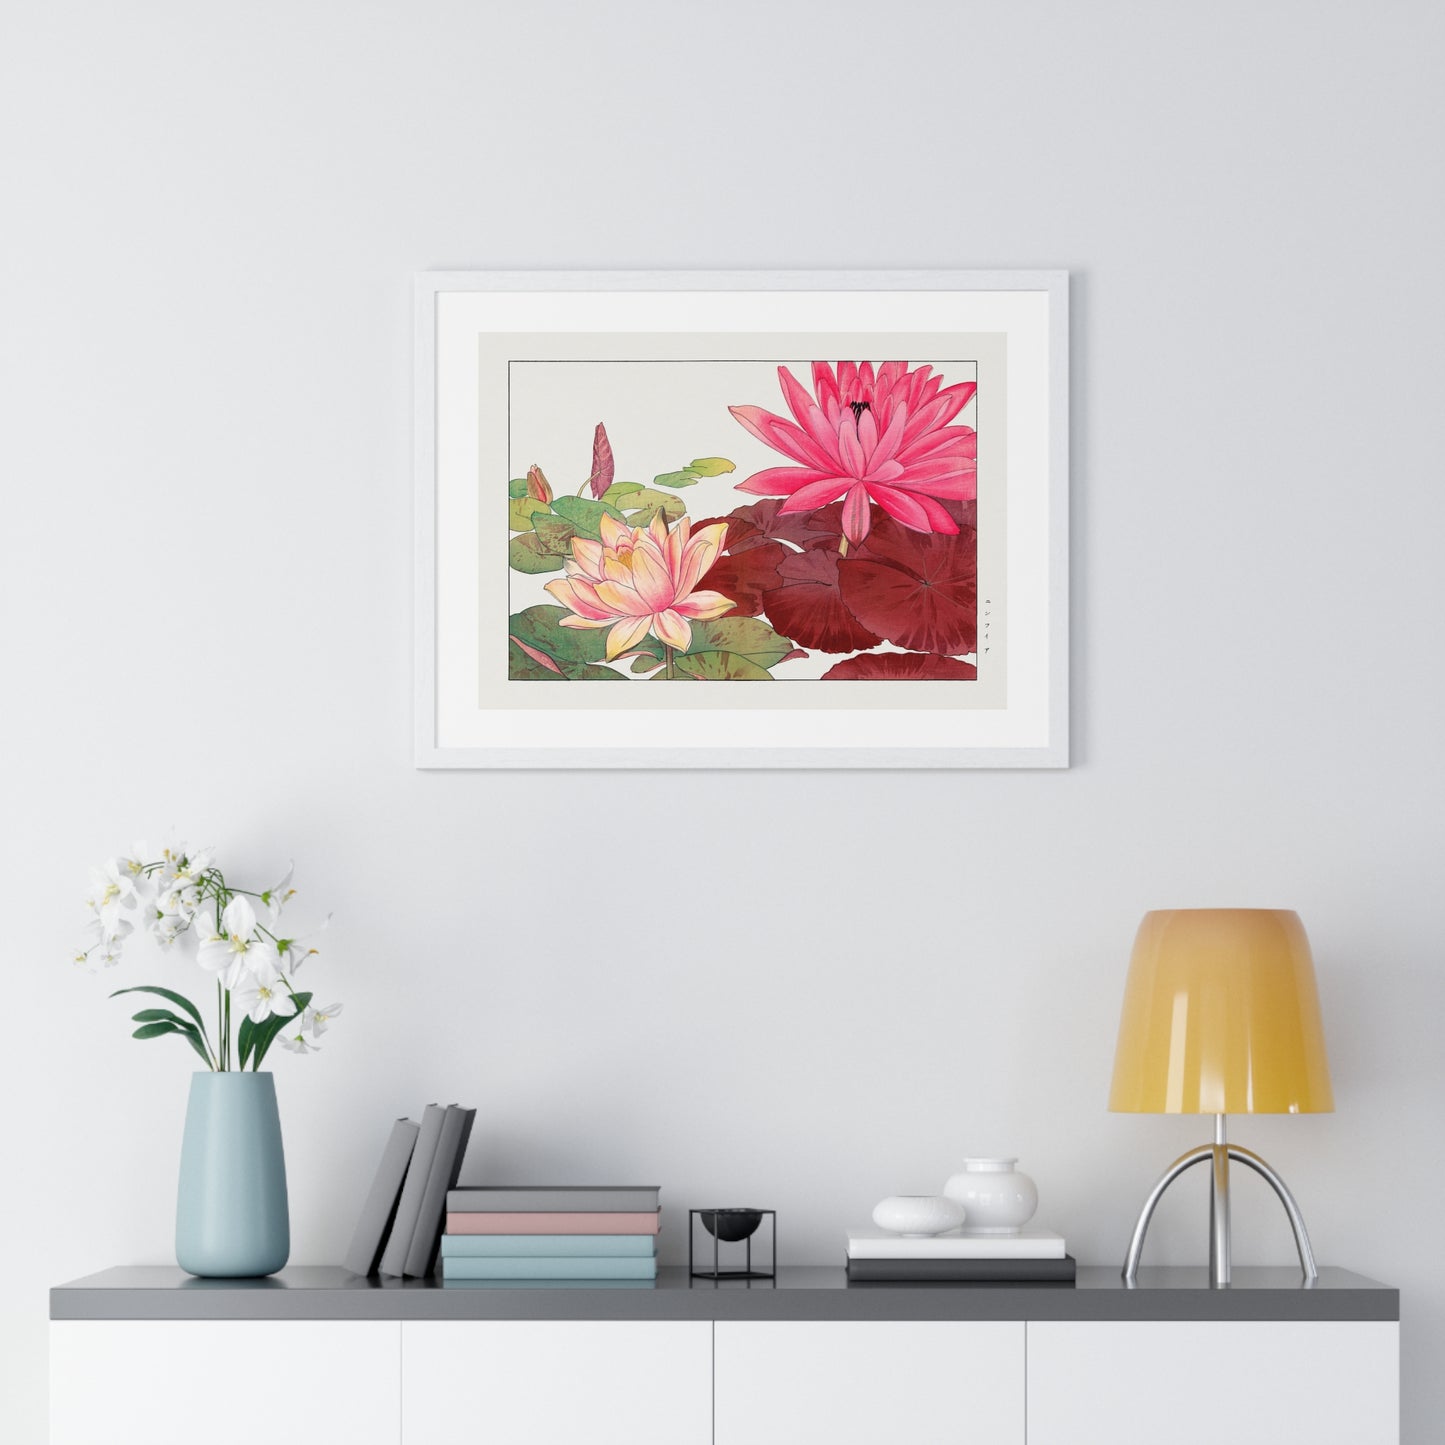 Japanese Woodblock Art, Nymphaea Lotus (1917)  by Tanigami Kônan, from the Original, Framed Print